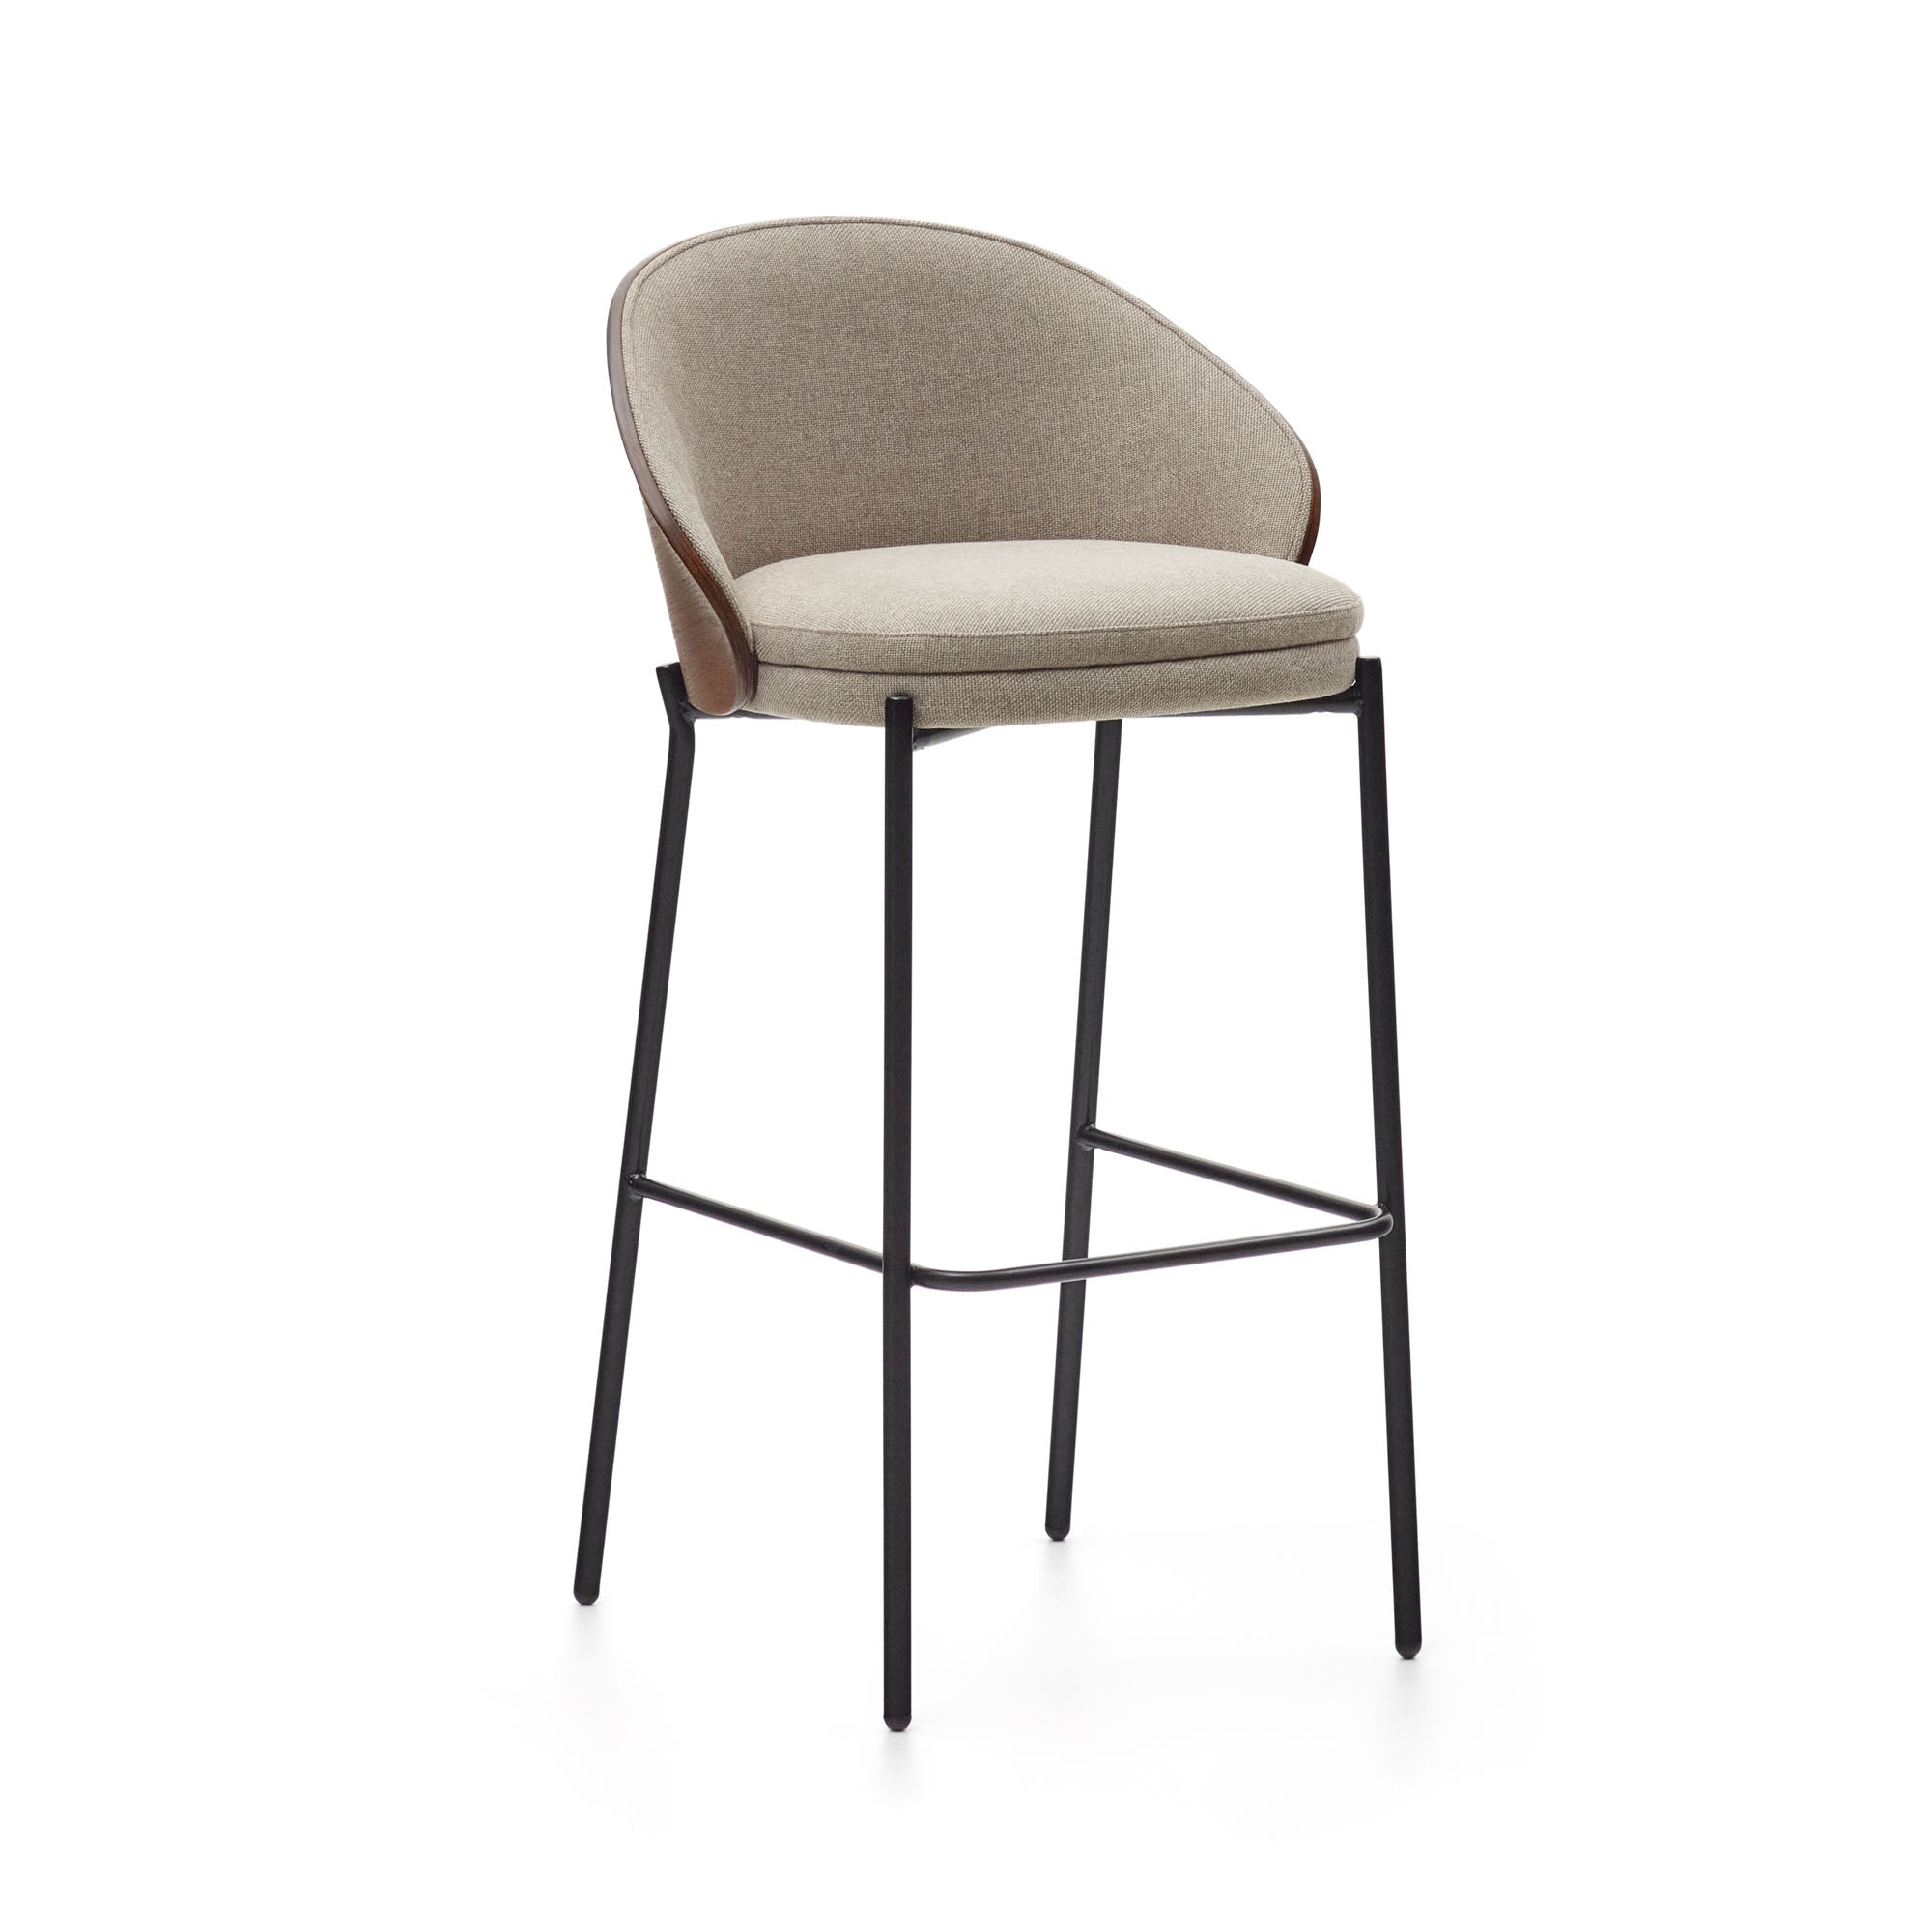 Eamy light brown stool in an ash wood veneer with a wenge finish and black metal, 77 cm